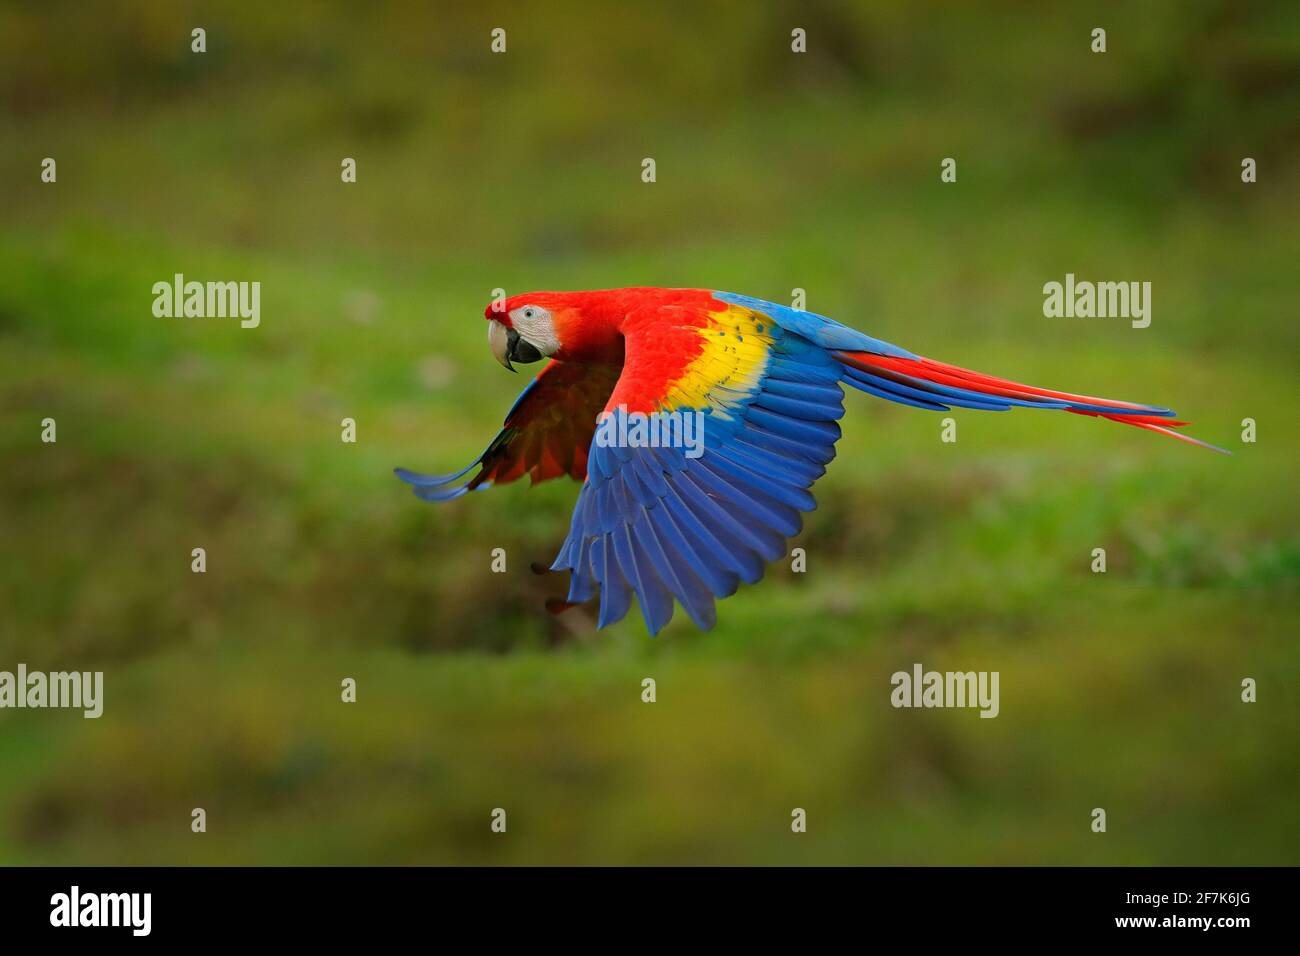 Red parrot in forest. Macaw parrot flying in dark green vegetation. Scarlet Macaw, Ara macao, in tropical forest, Costa Rica. Wildlife scene from trop Stock Photo